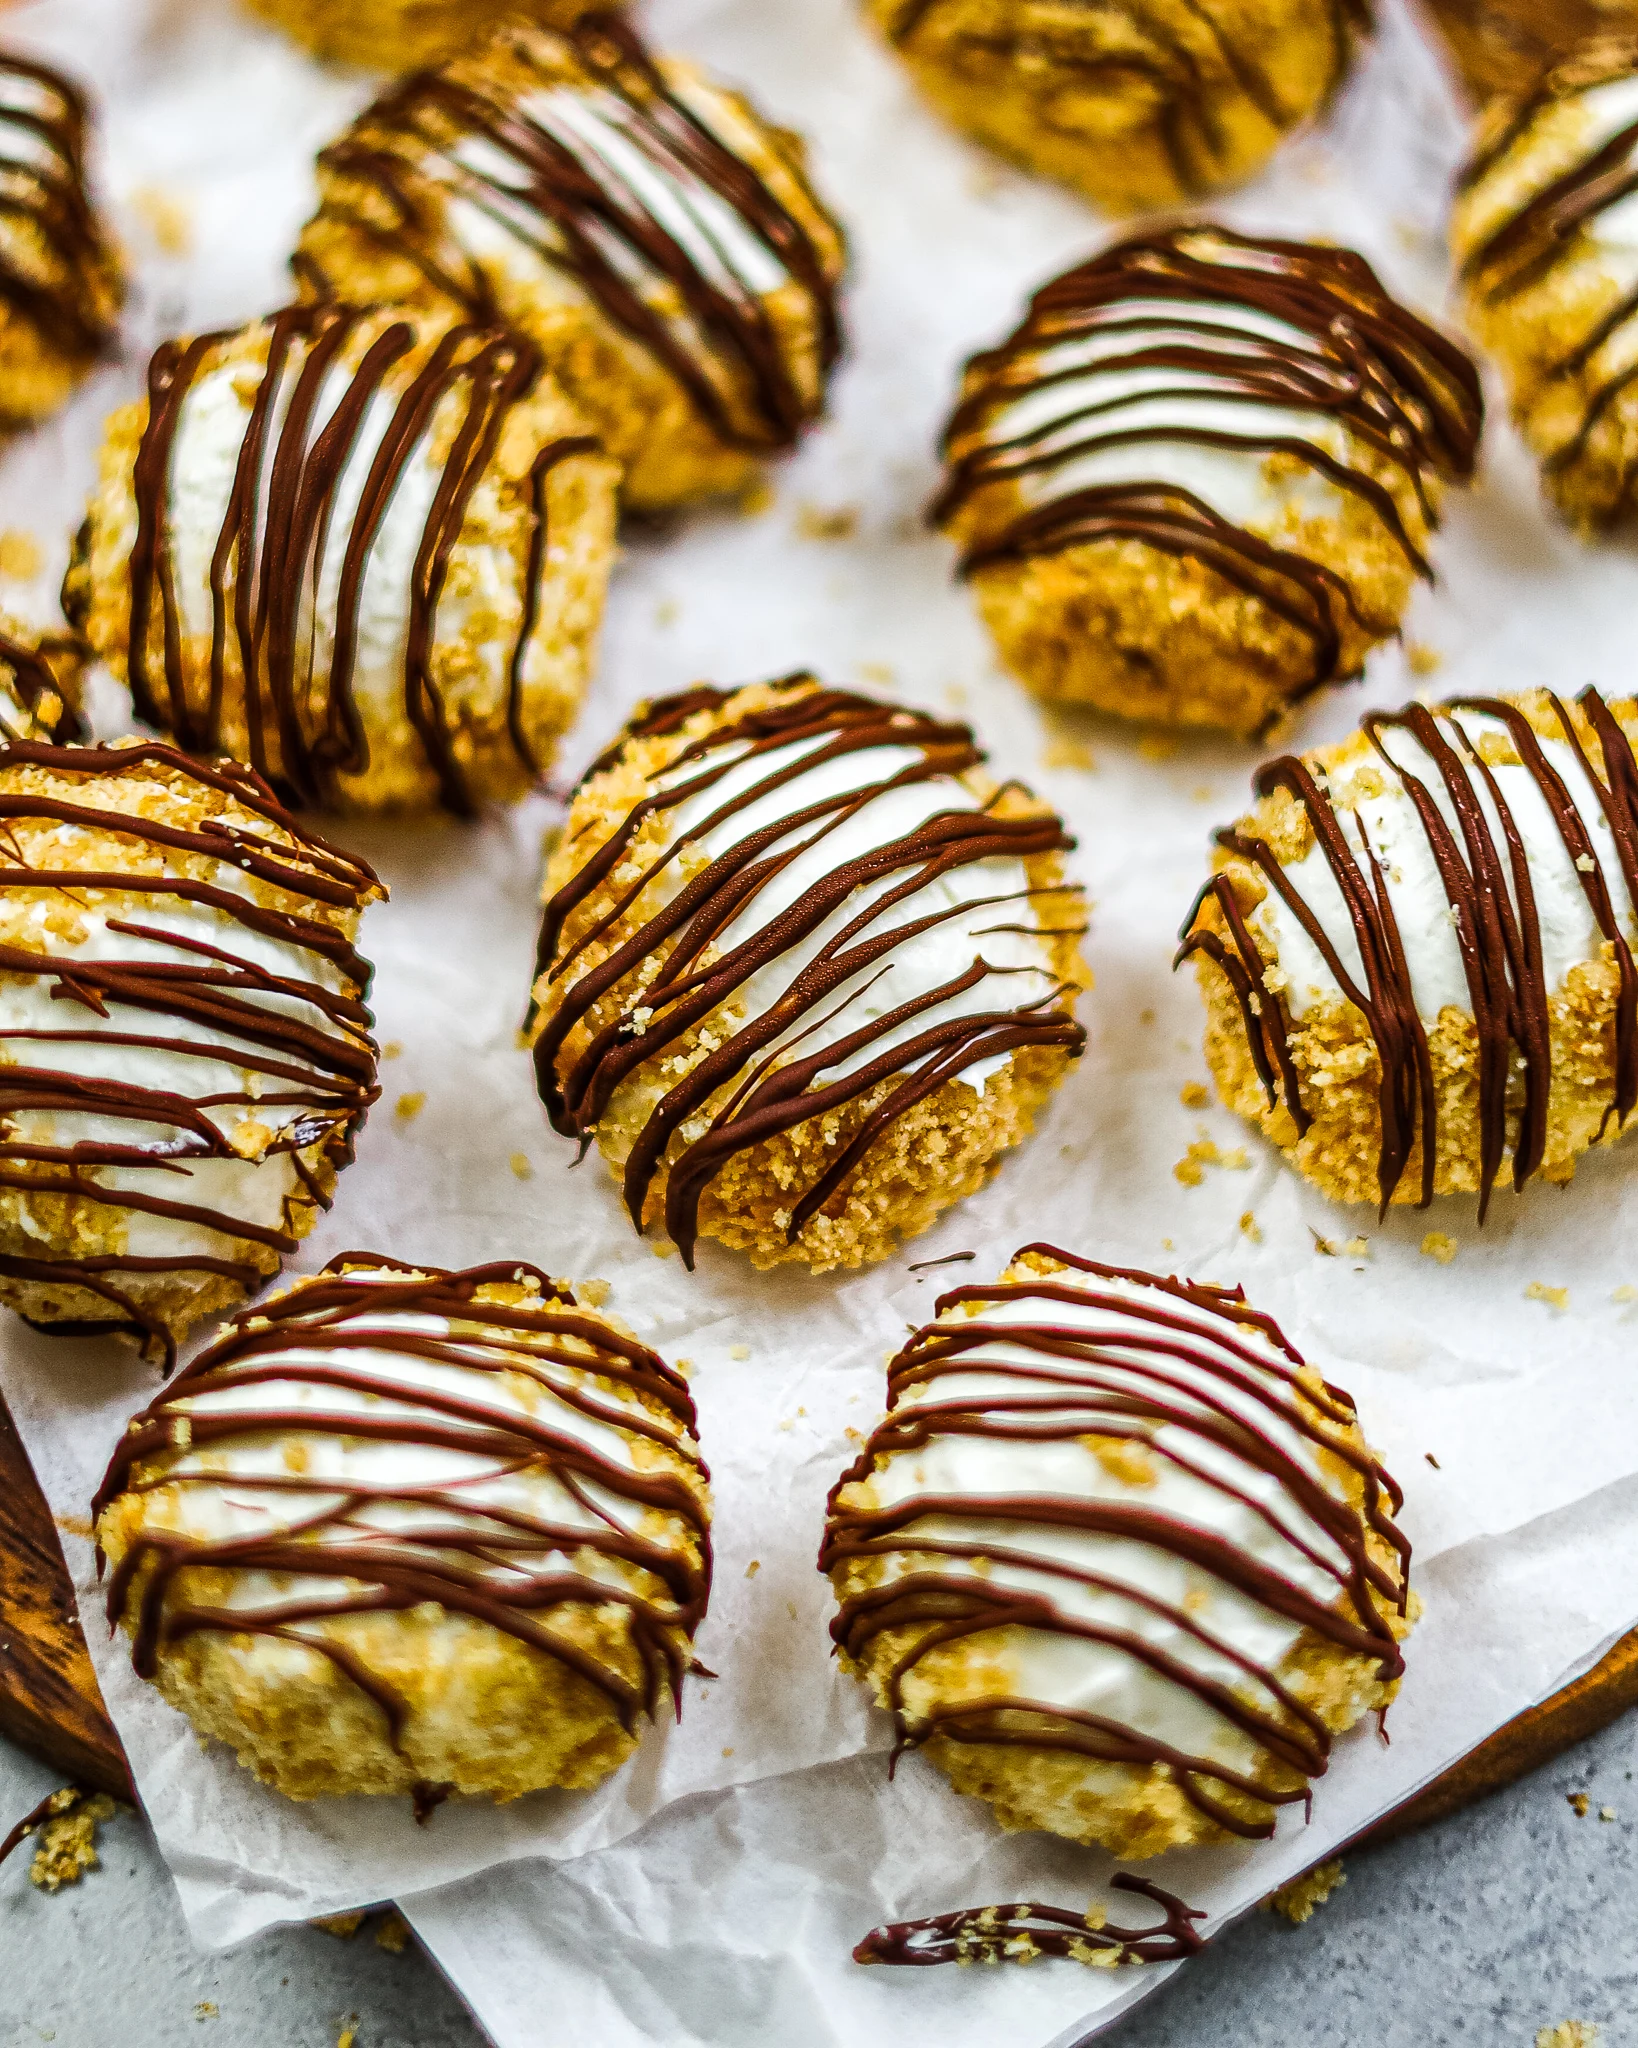 image of no bake cheesecake bites that have been drizzled with melted chocolate